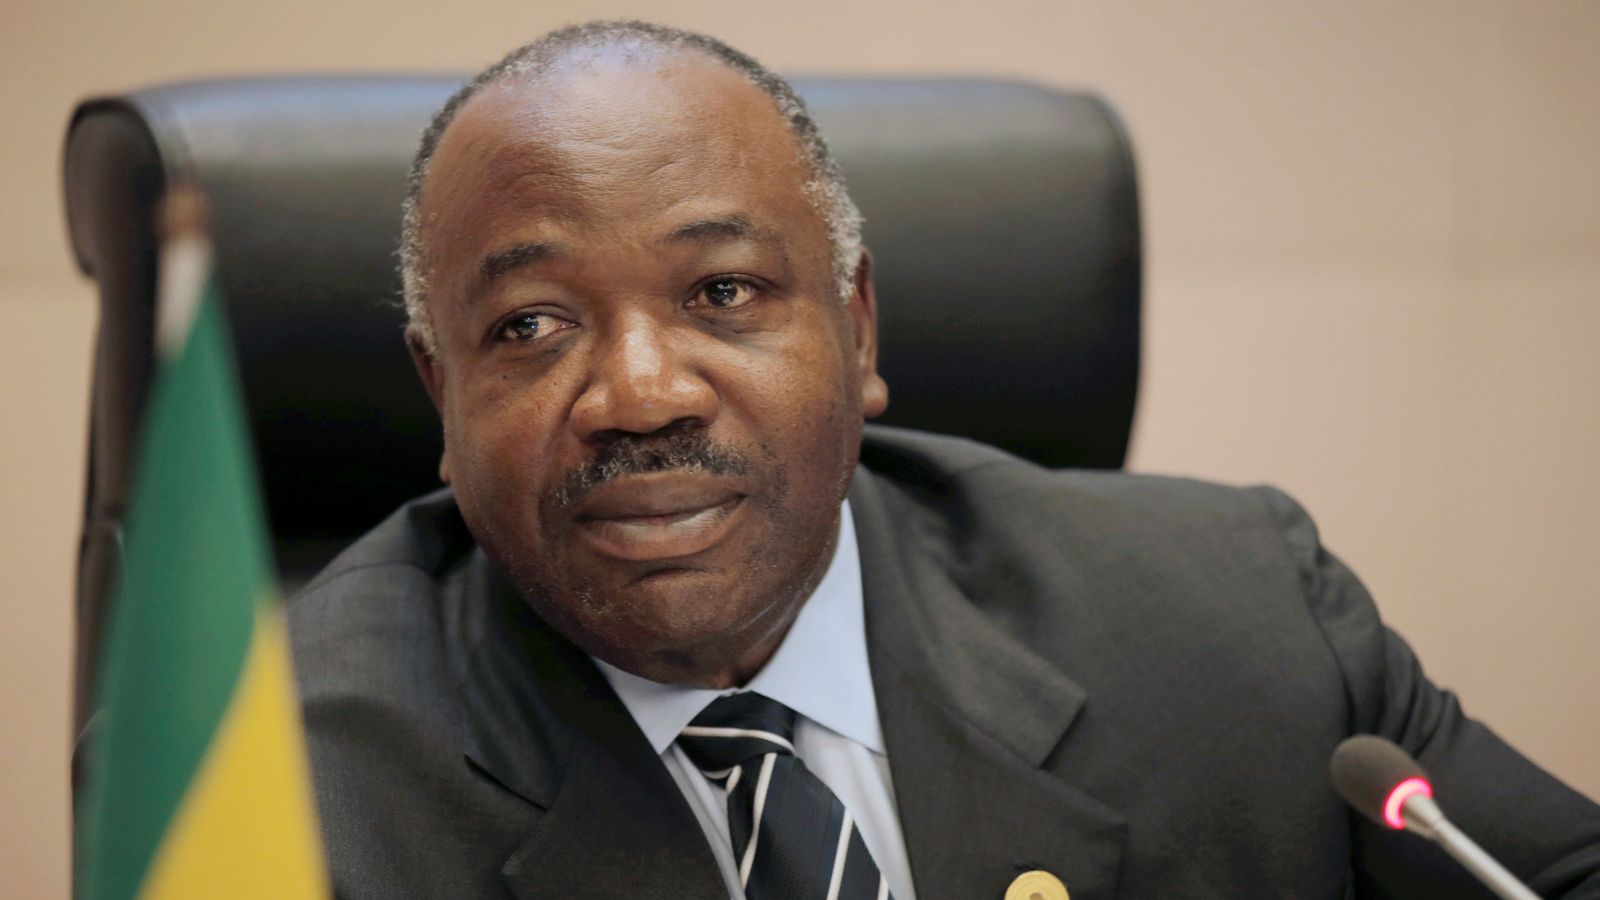 Military announce coup in Gabon as senior officers seize power after presidential election